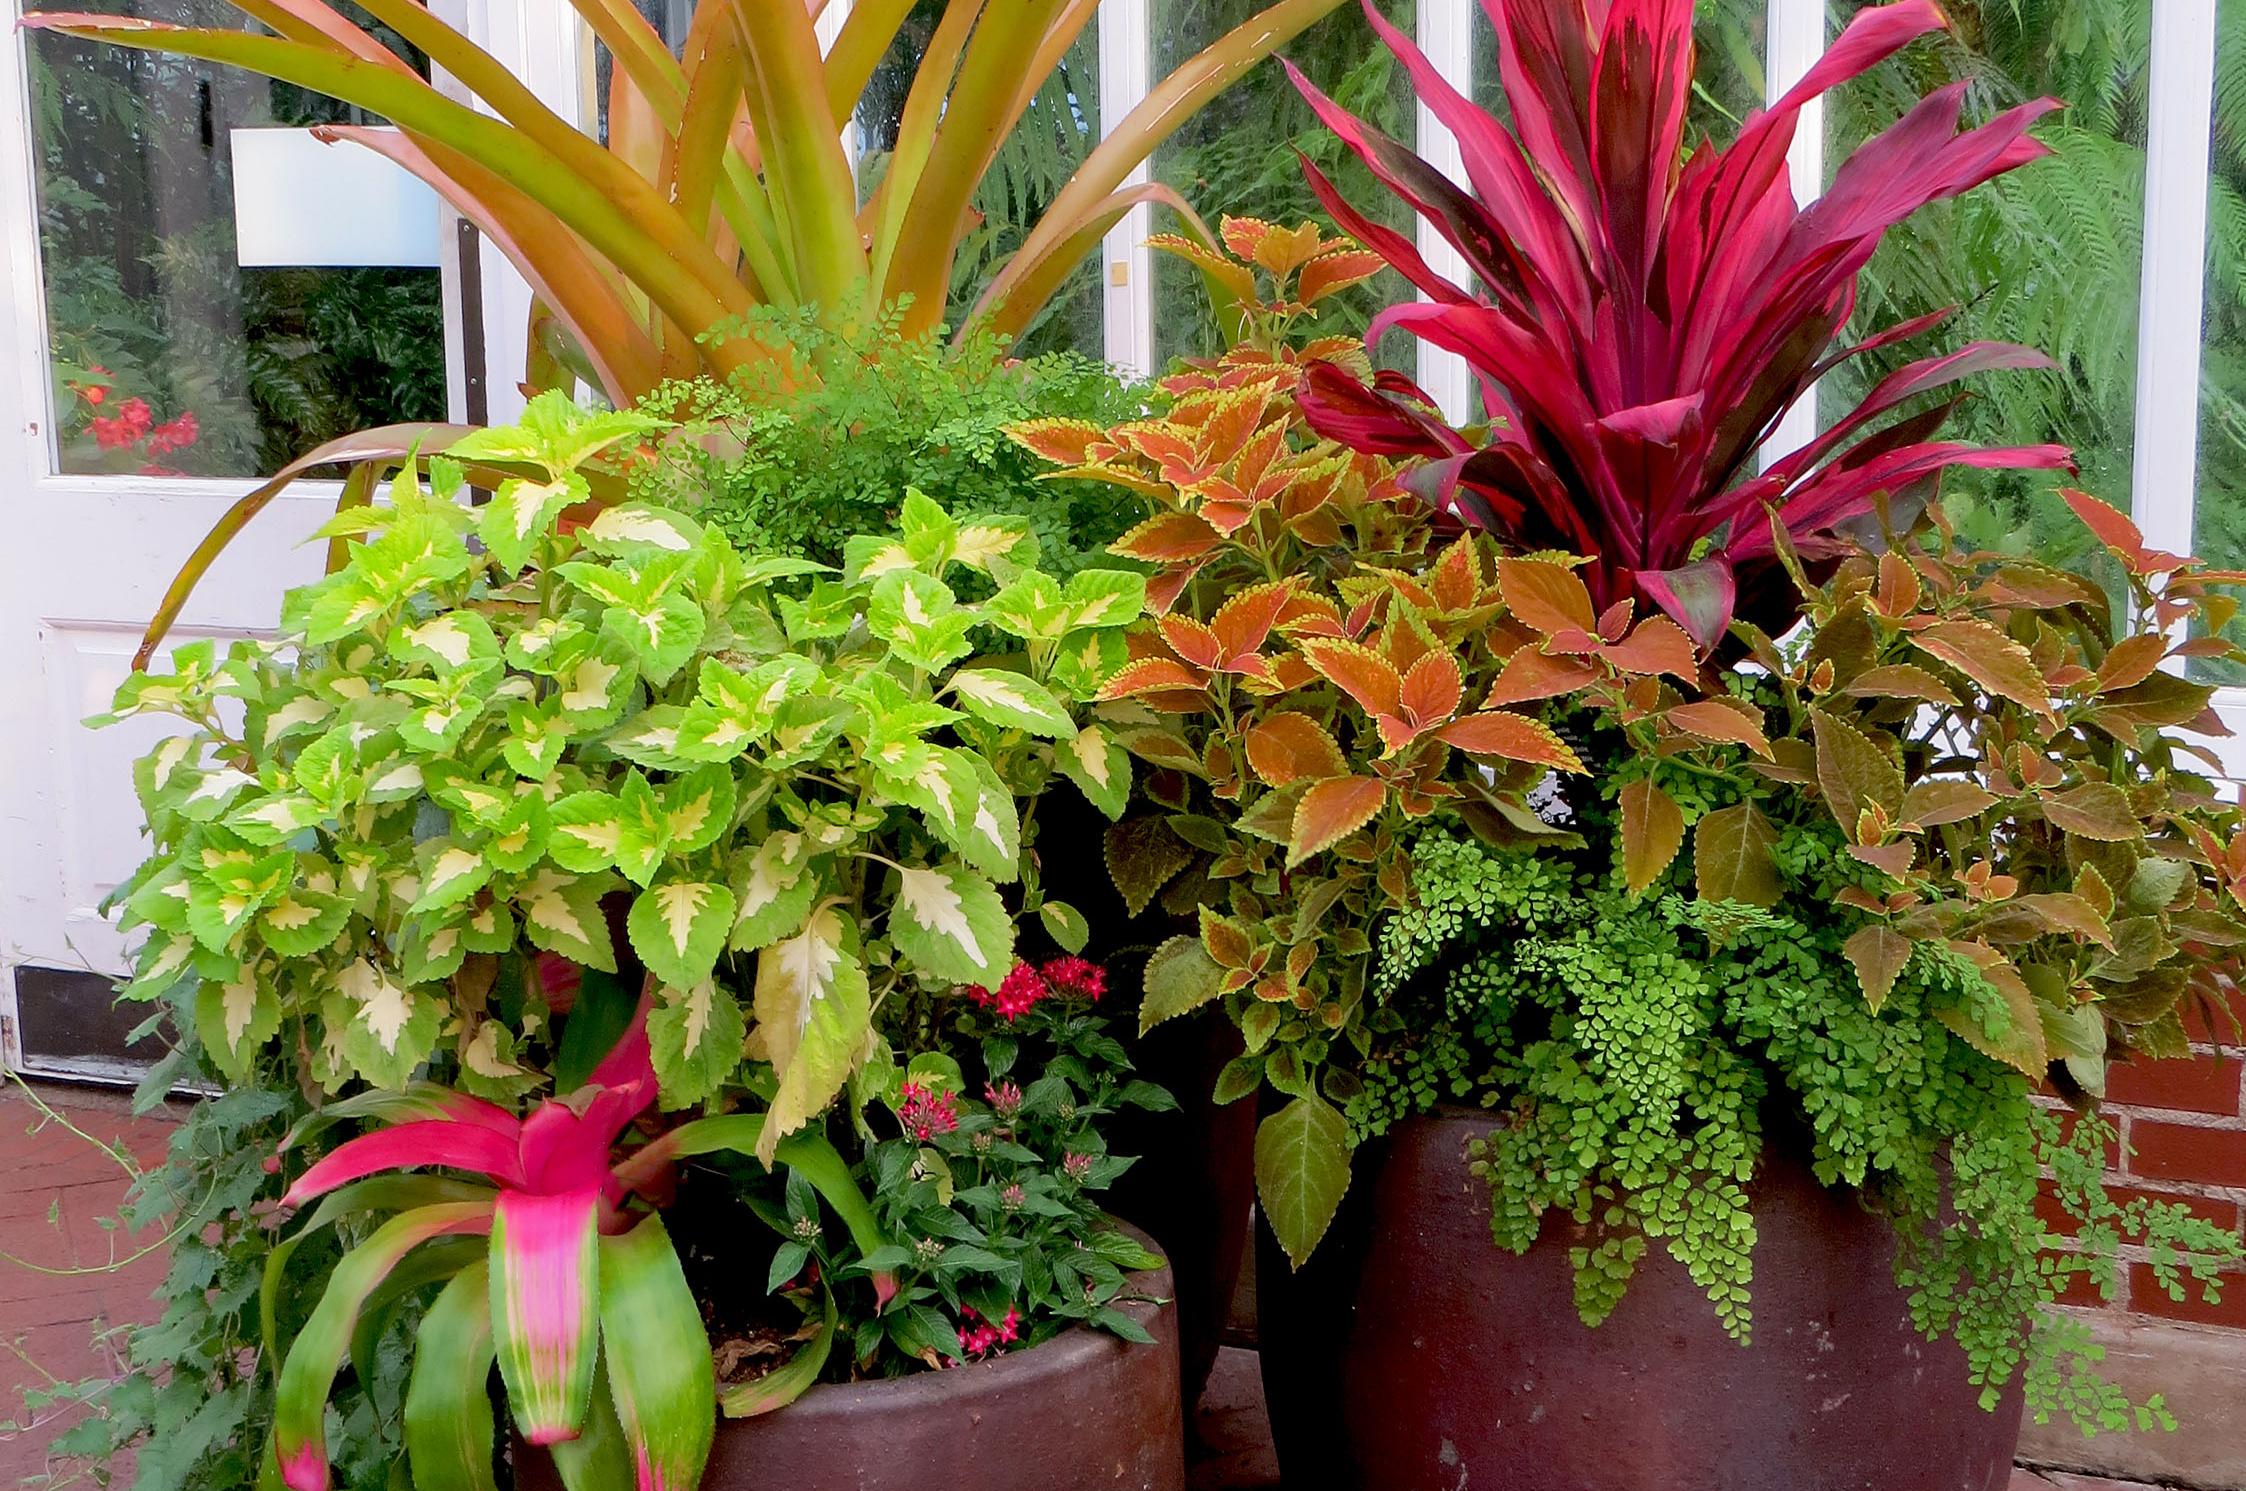 in the garden: after choosing right container, think thriller, filler